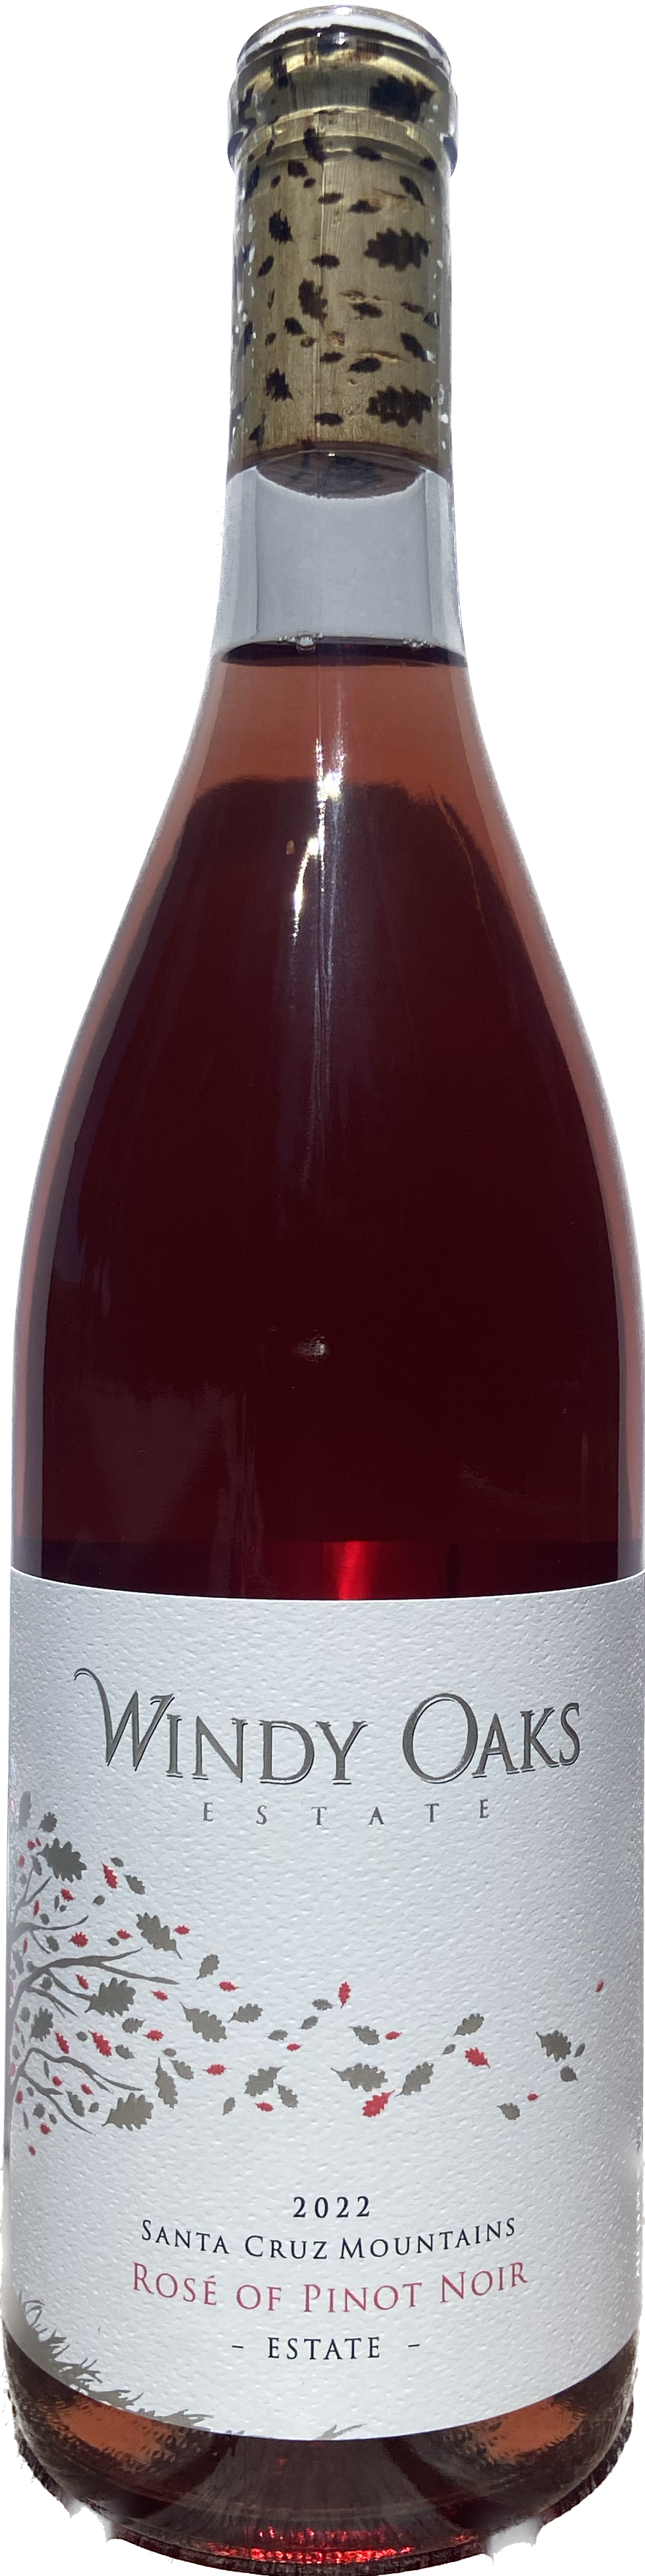 Product Image for 2022 Estate Rosé of Pinot Noir